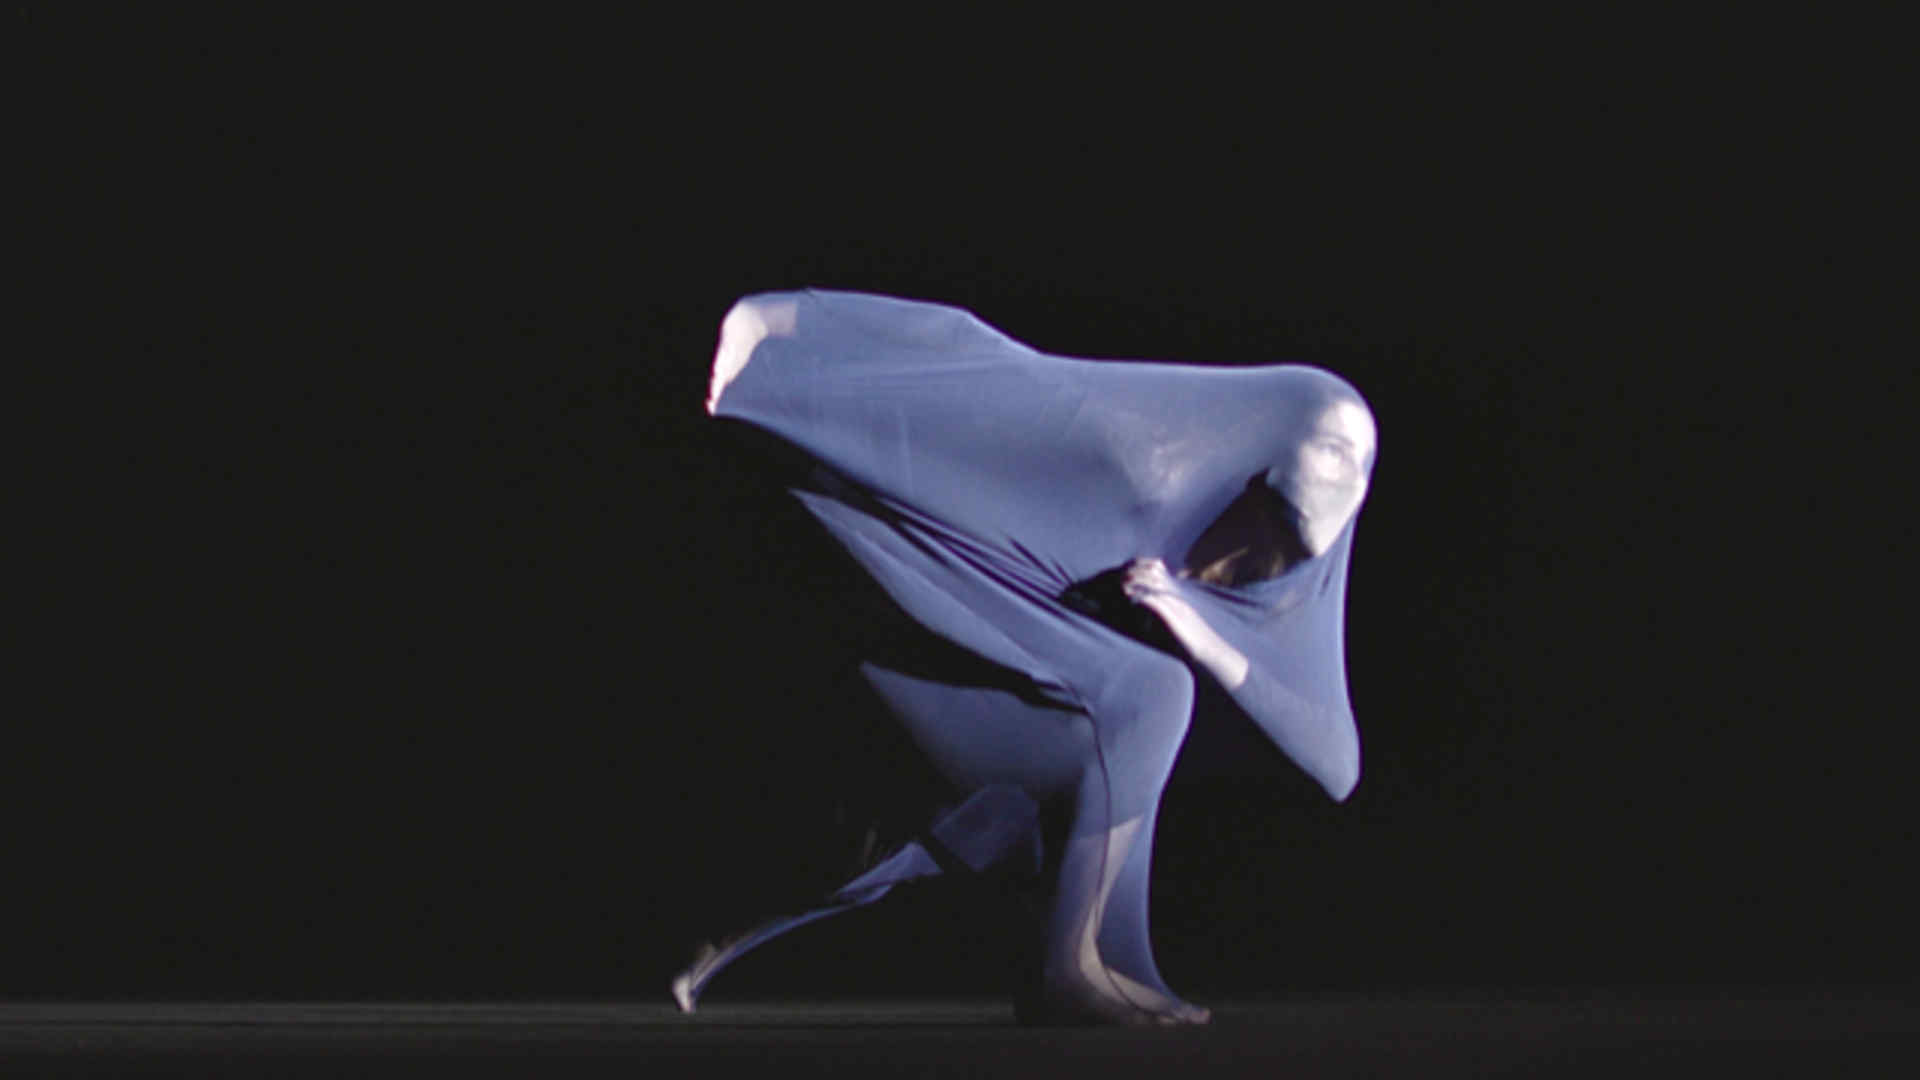 A dancer, costumed in a body sock, poses against a black background